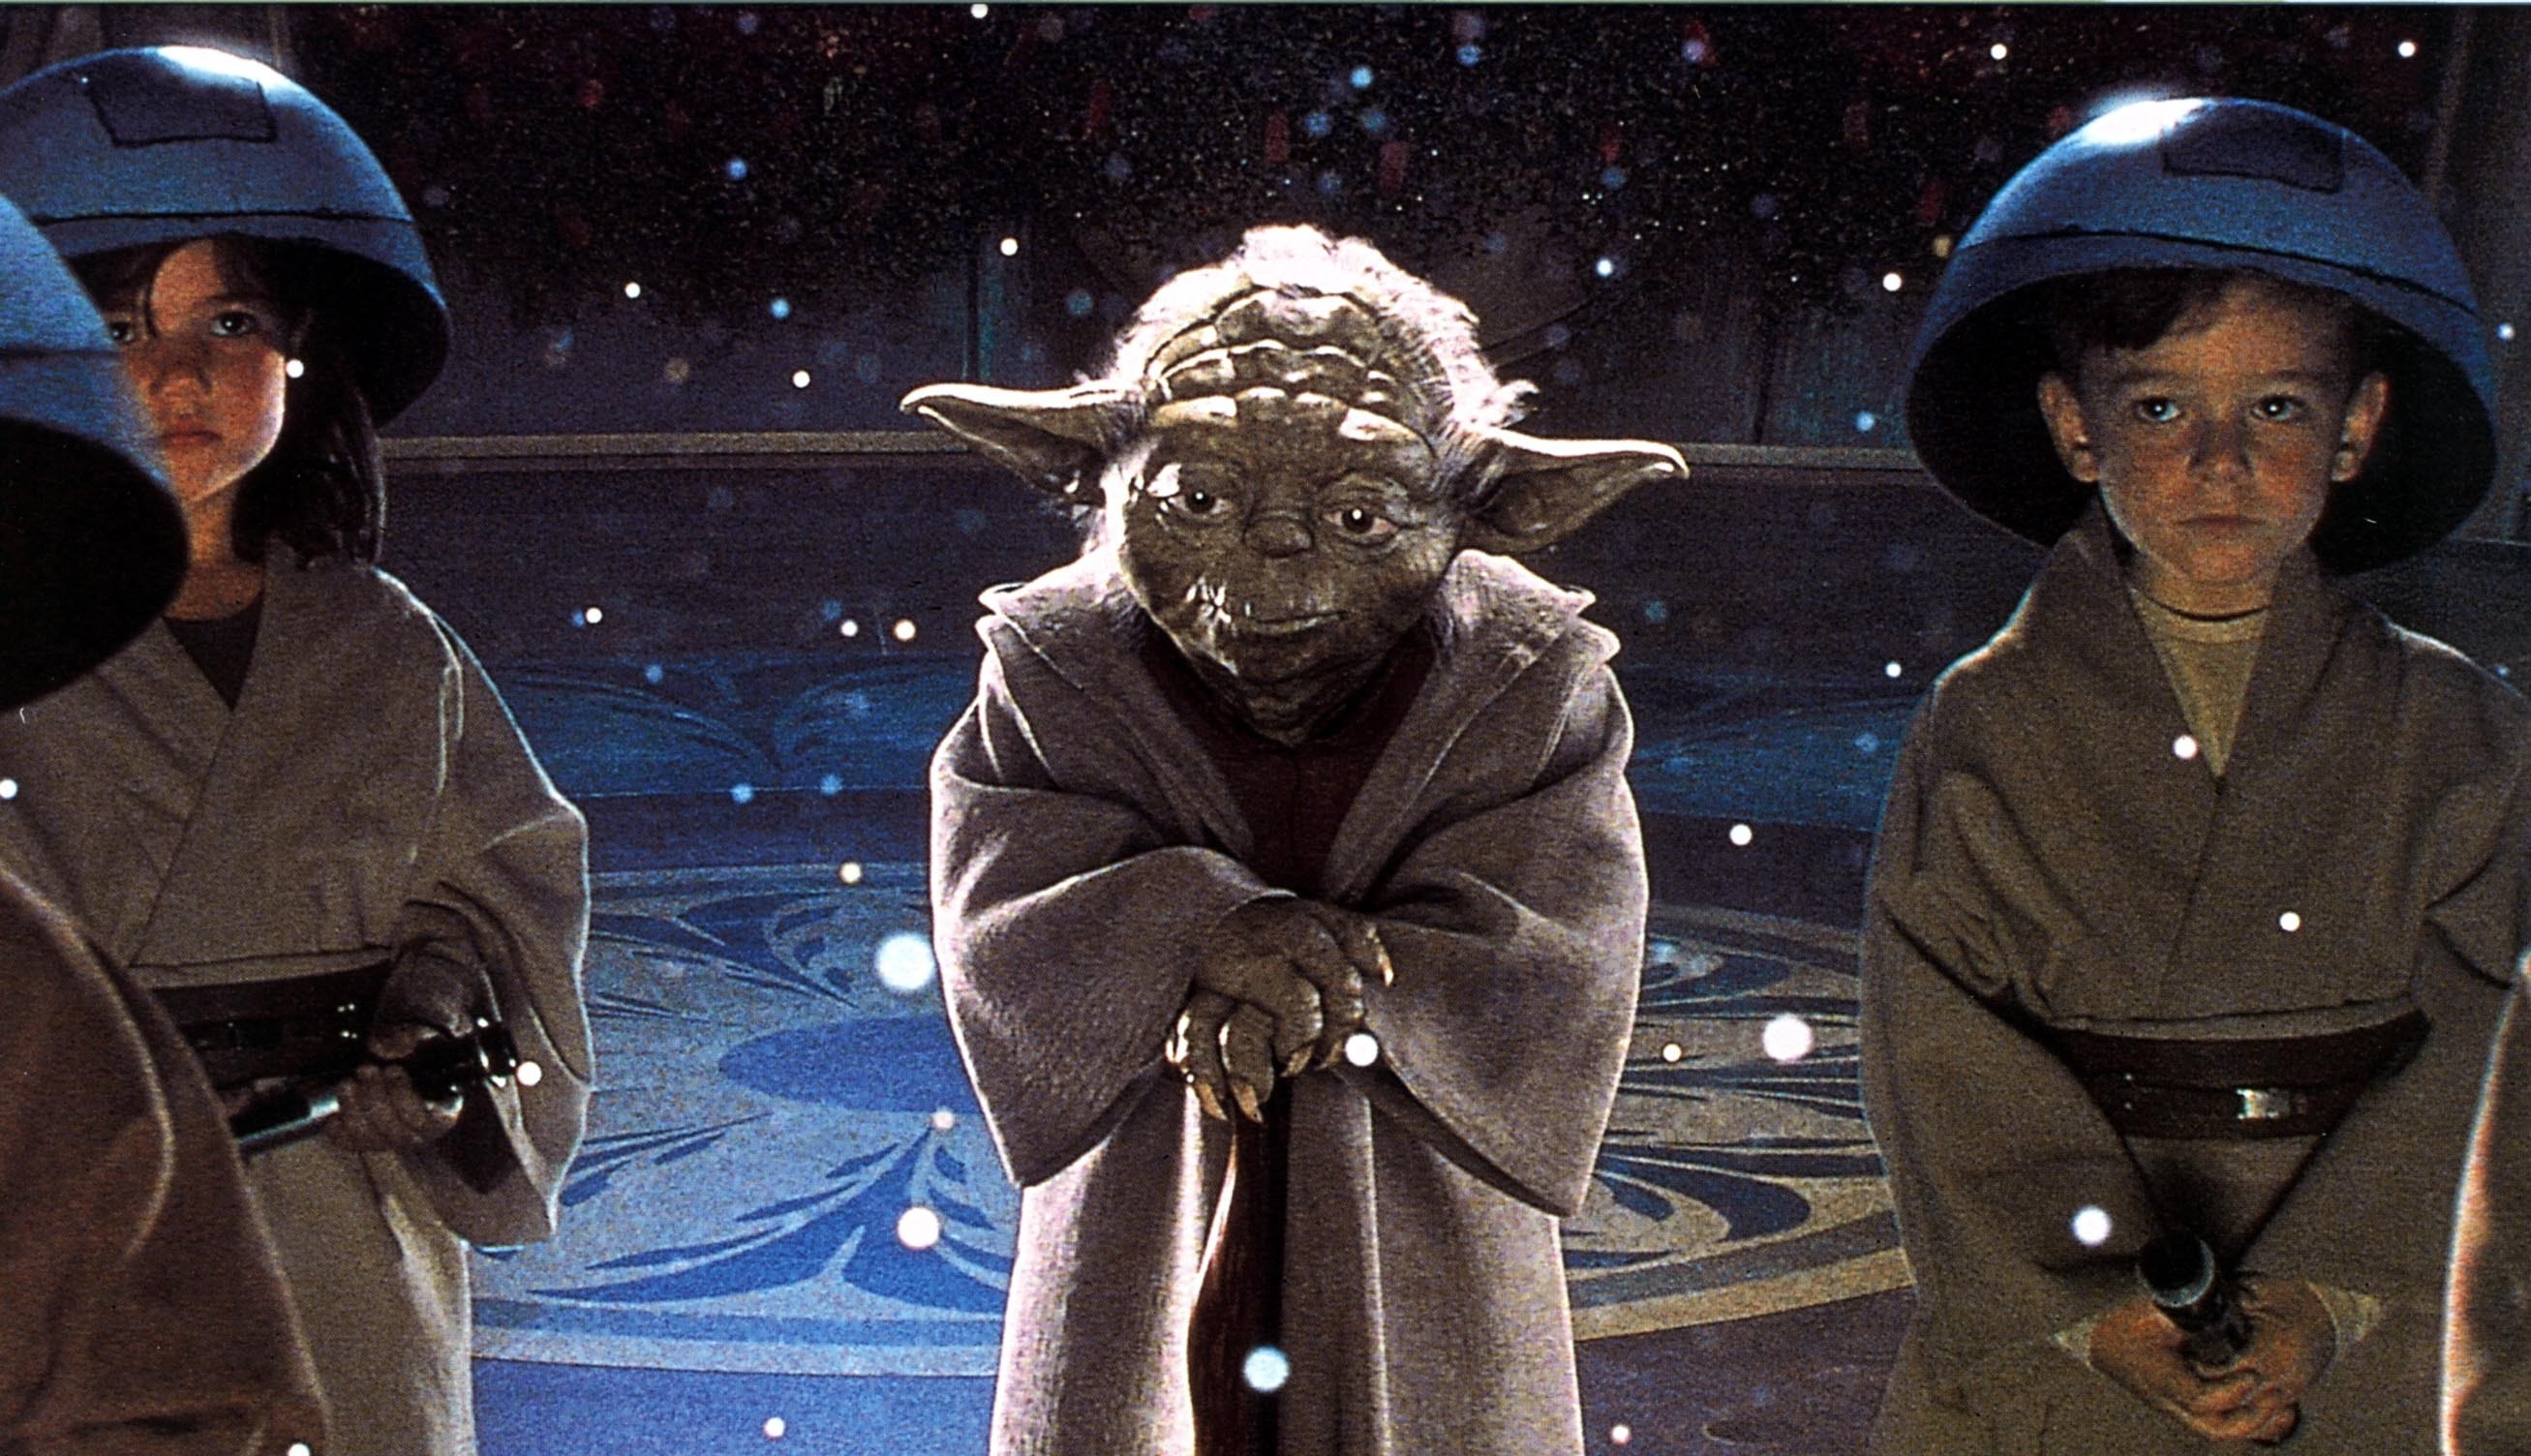 Yoda looks at someone while surrounded by two boys